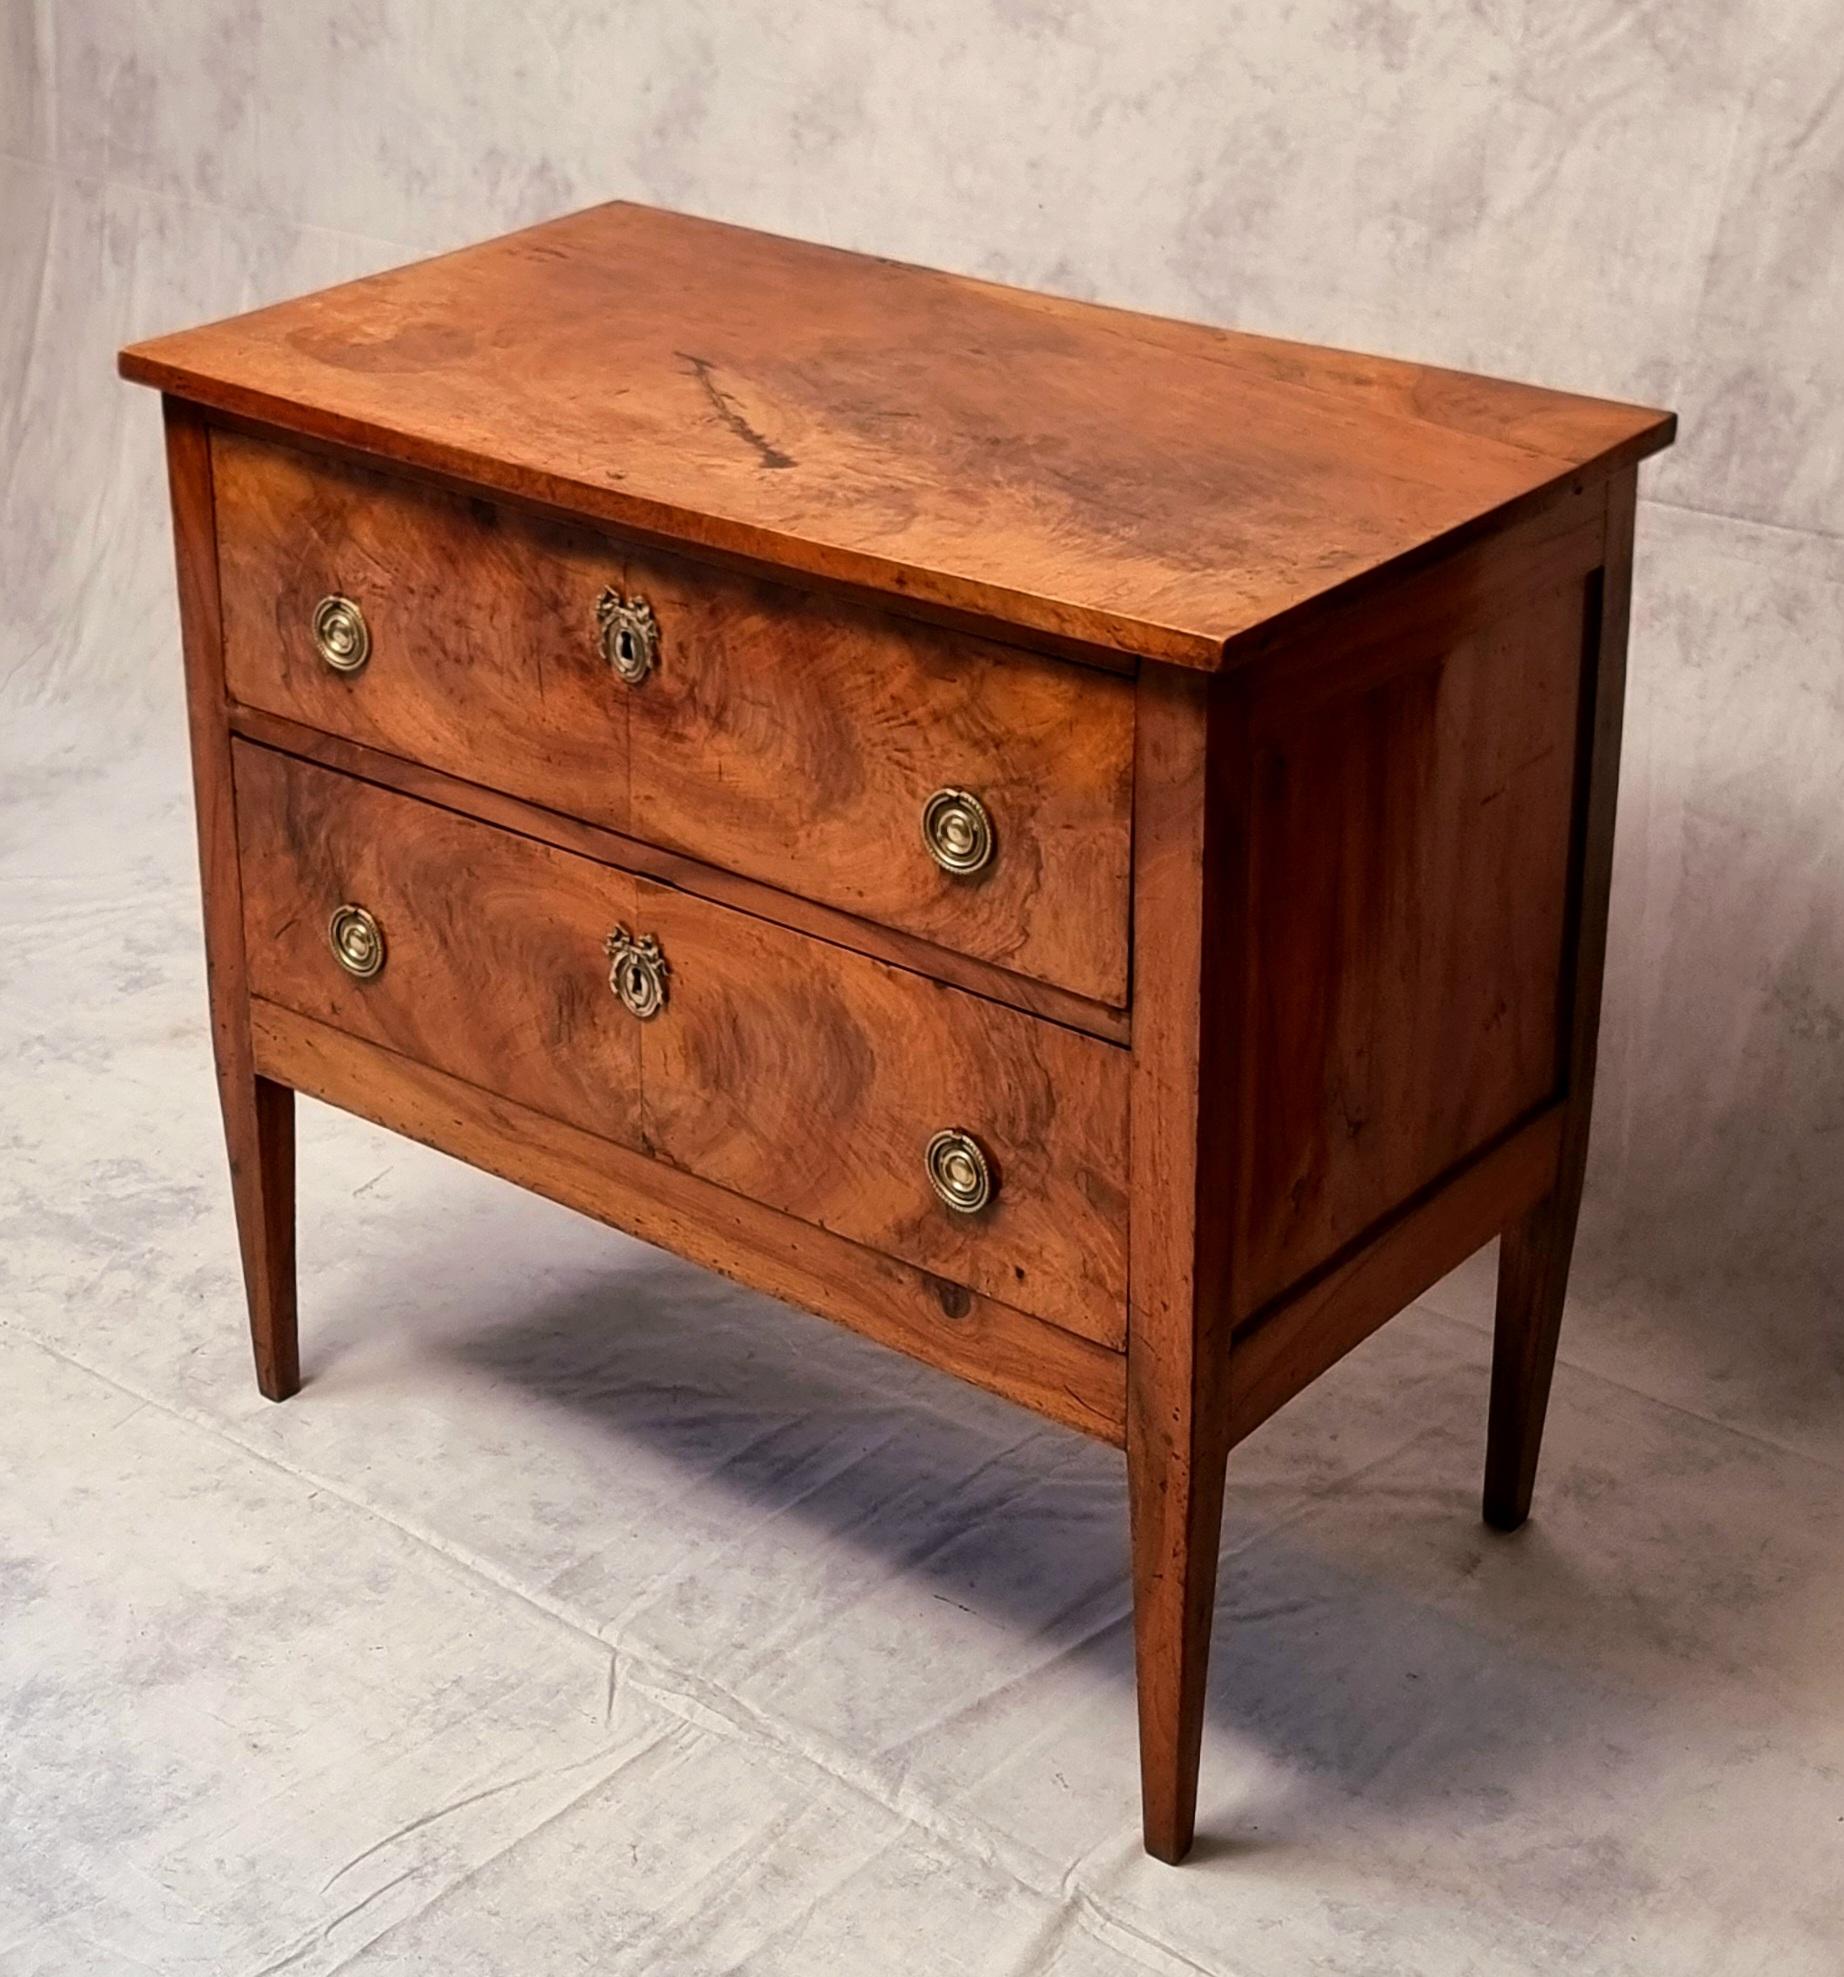 Superb chest of drawers from eastern France from the Directoire period in walnut. This chest of drawers is the result of work from the end of the 18th century. Its style, its manufacture and the use of blond walnut allow us to think that it probably